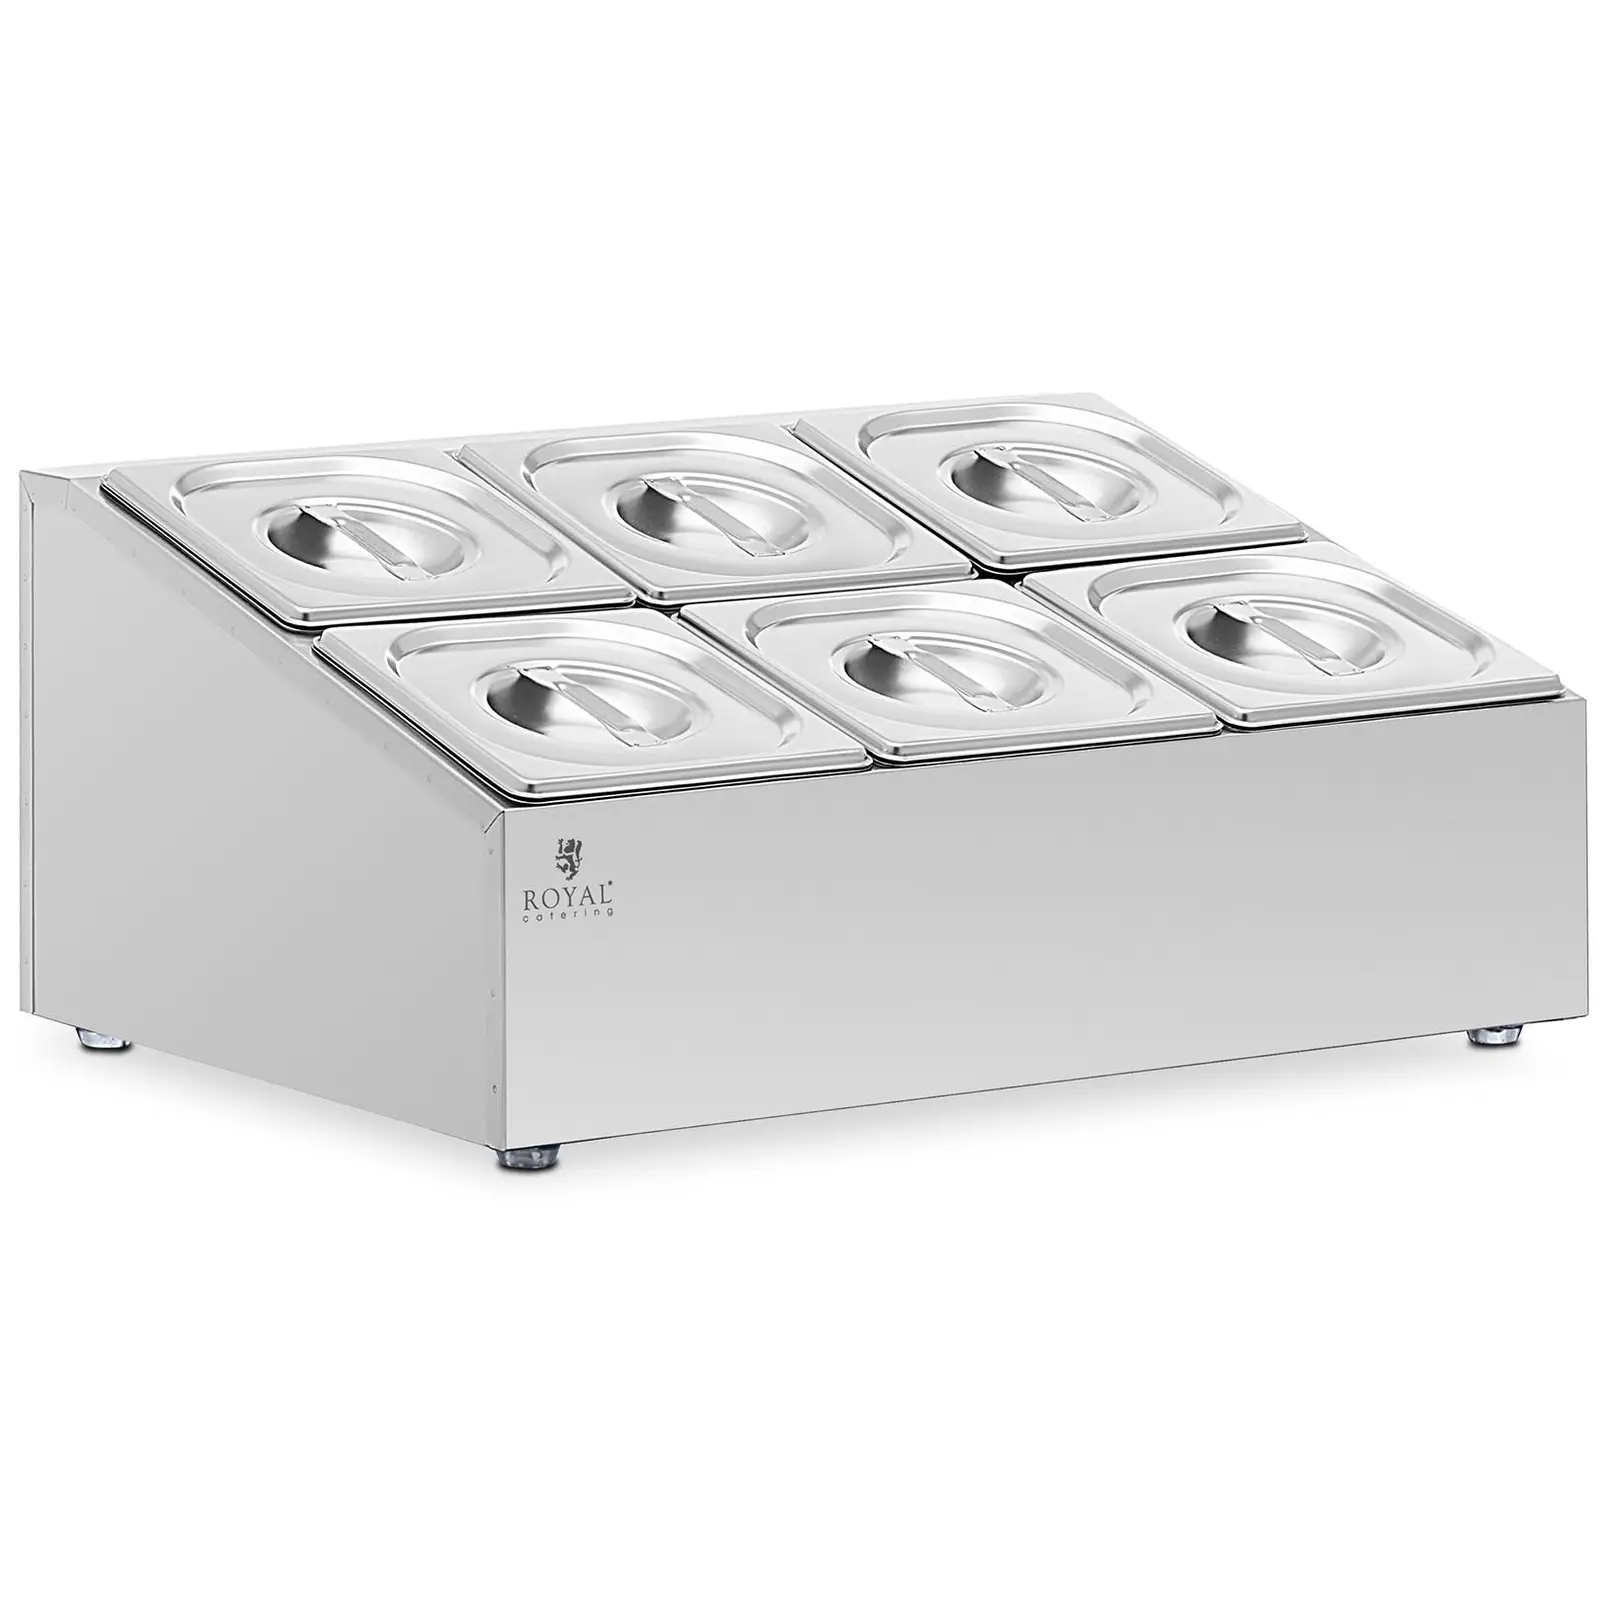 Vandens vonia („Bain-marie“) - 2 x 3 GN 1/6 - 11,4 l - „Royal Catering“